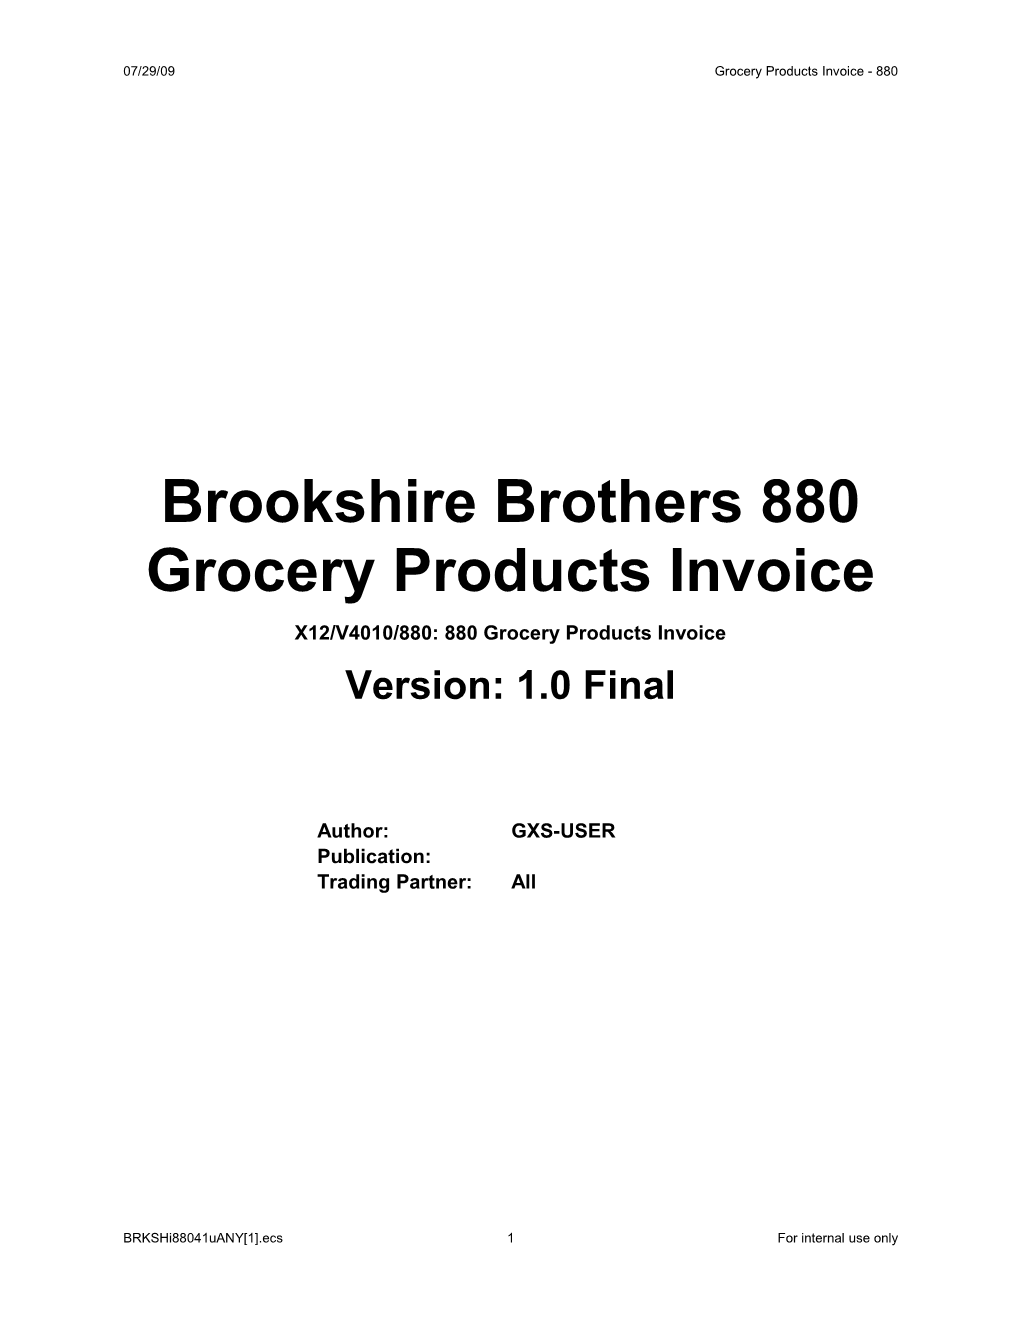 Brookshire Brothers 880 Grocery Products Invoice